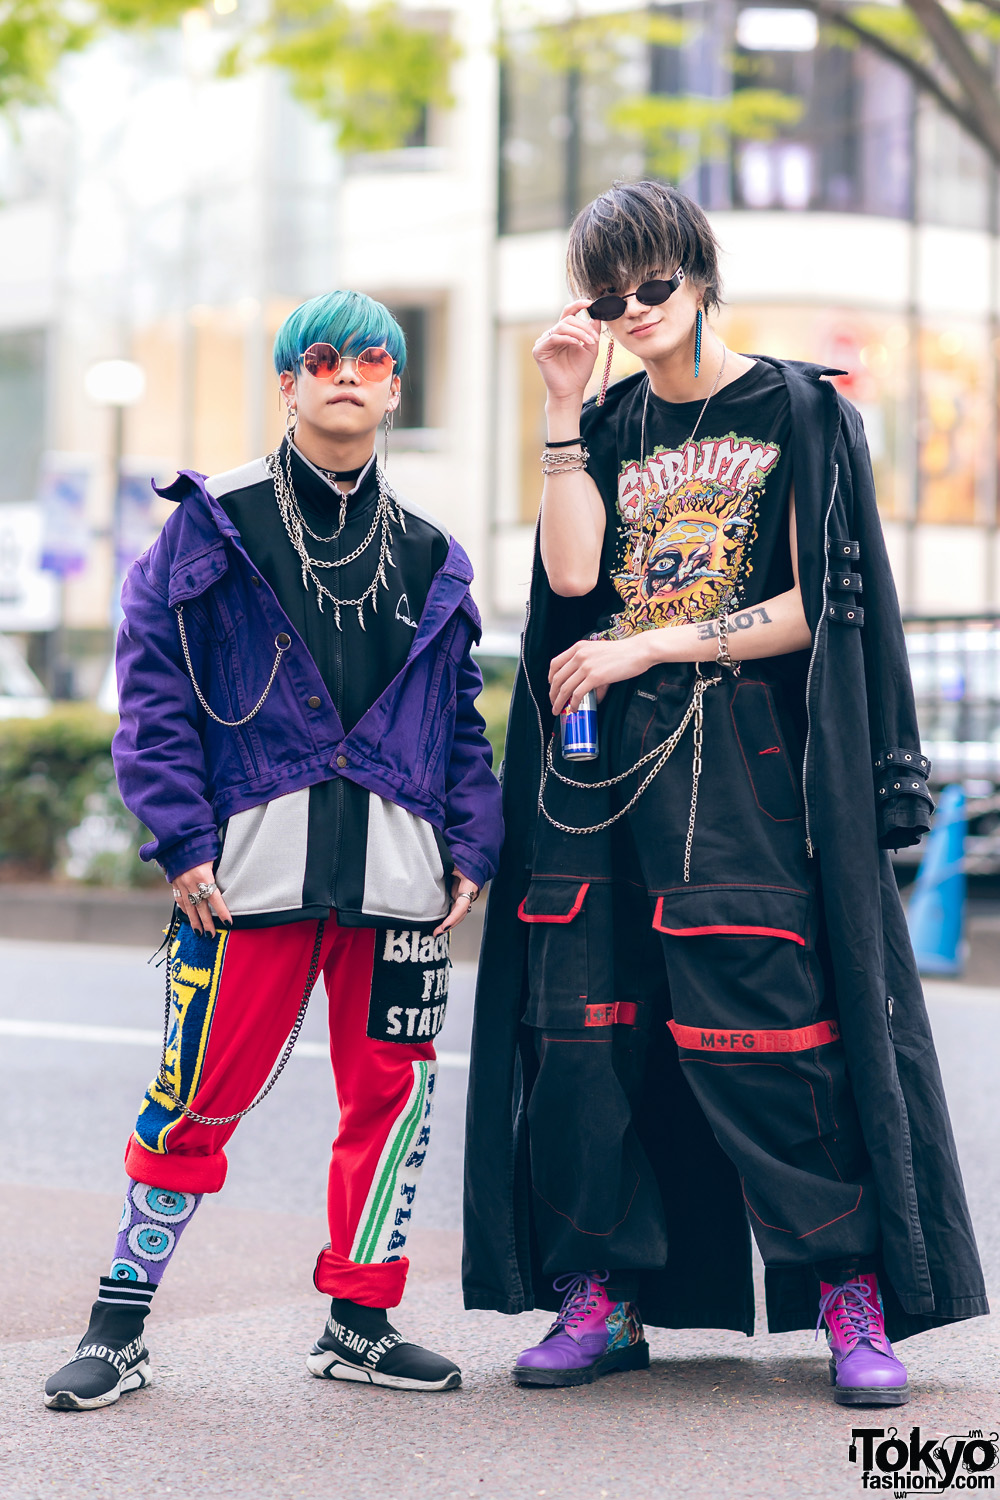 Harajuku Guys Street Styles w/ Broke City Gold Denim Jacket, Patched Pants, Tripp NYC Coat, Marithe + Francois Girbaud & Dr. Martens x New Order Boots